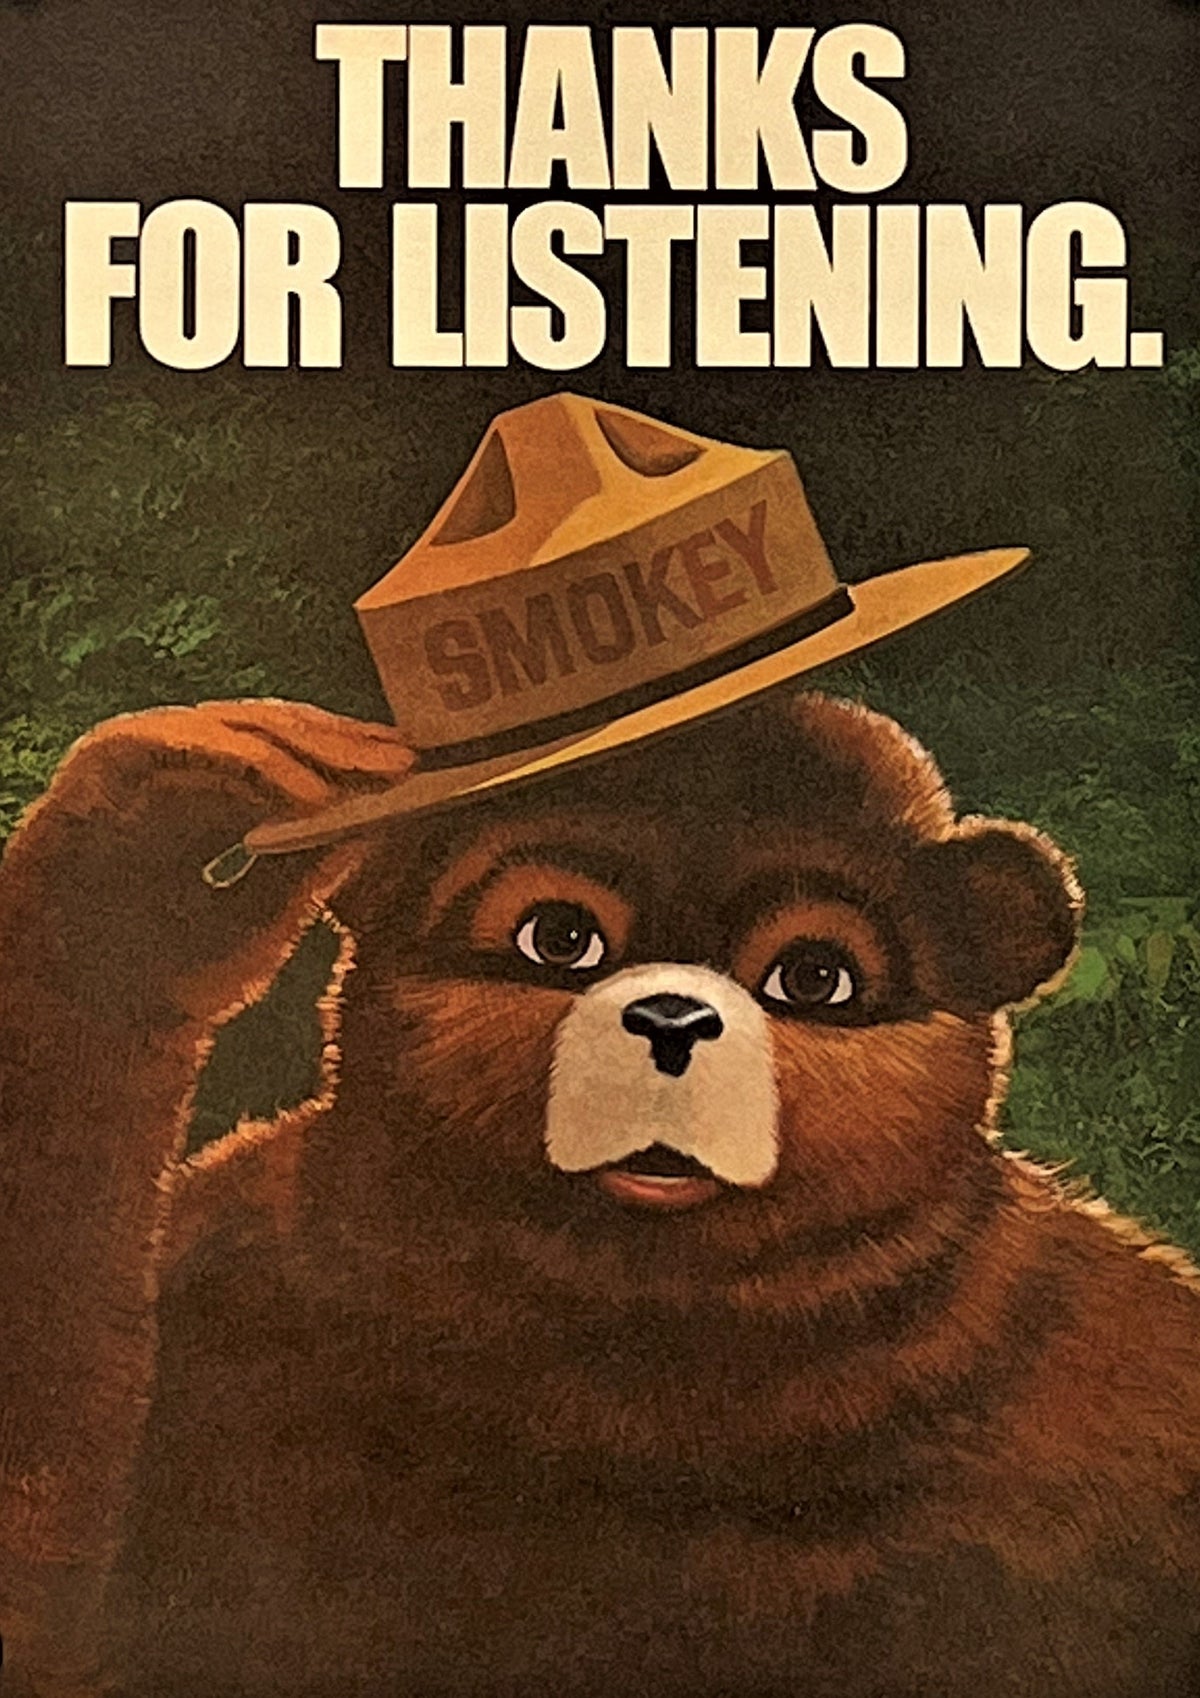 Smokey Thanks For Listening - Authentic Vintage Window Card